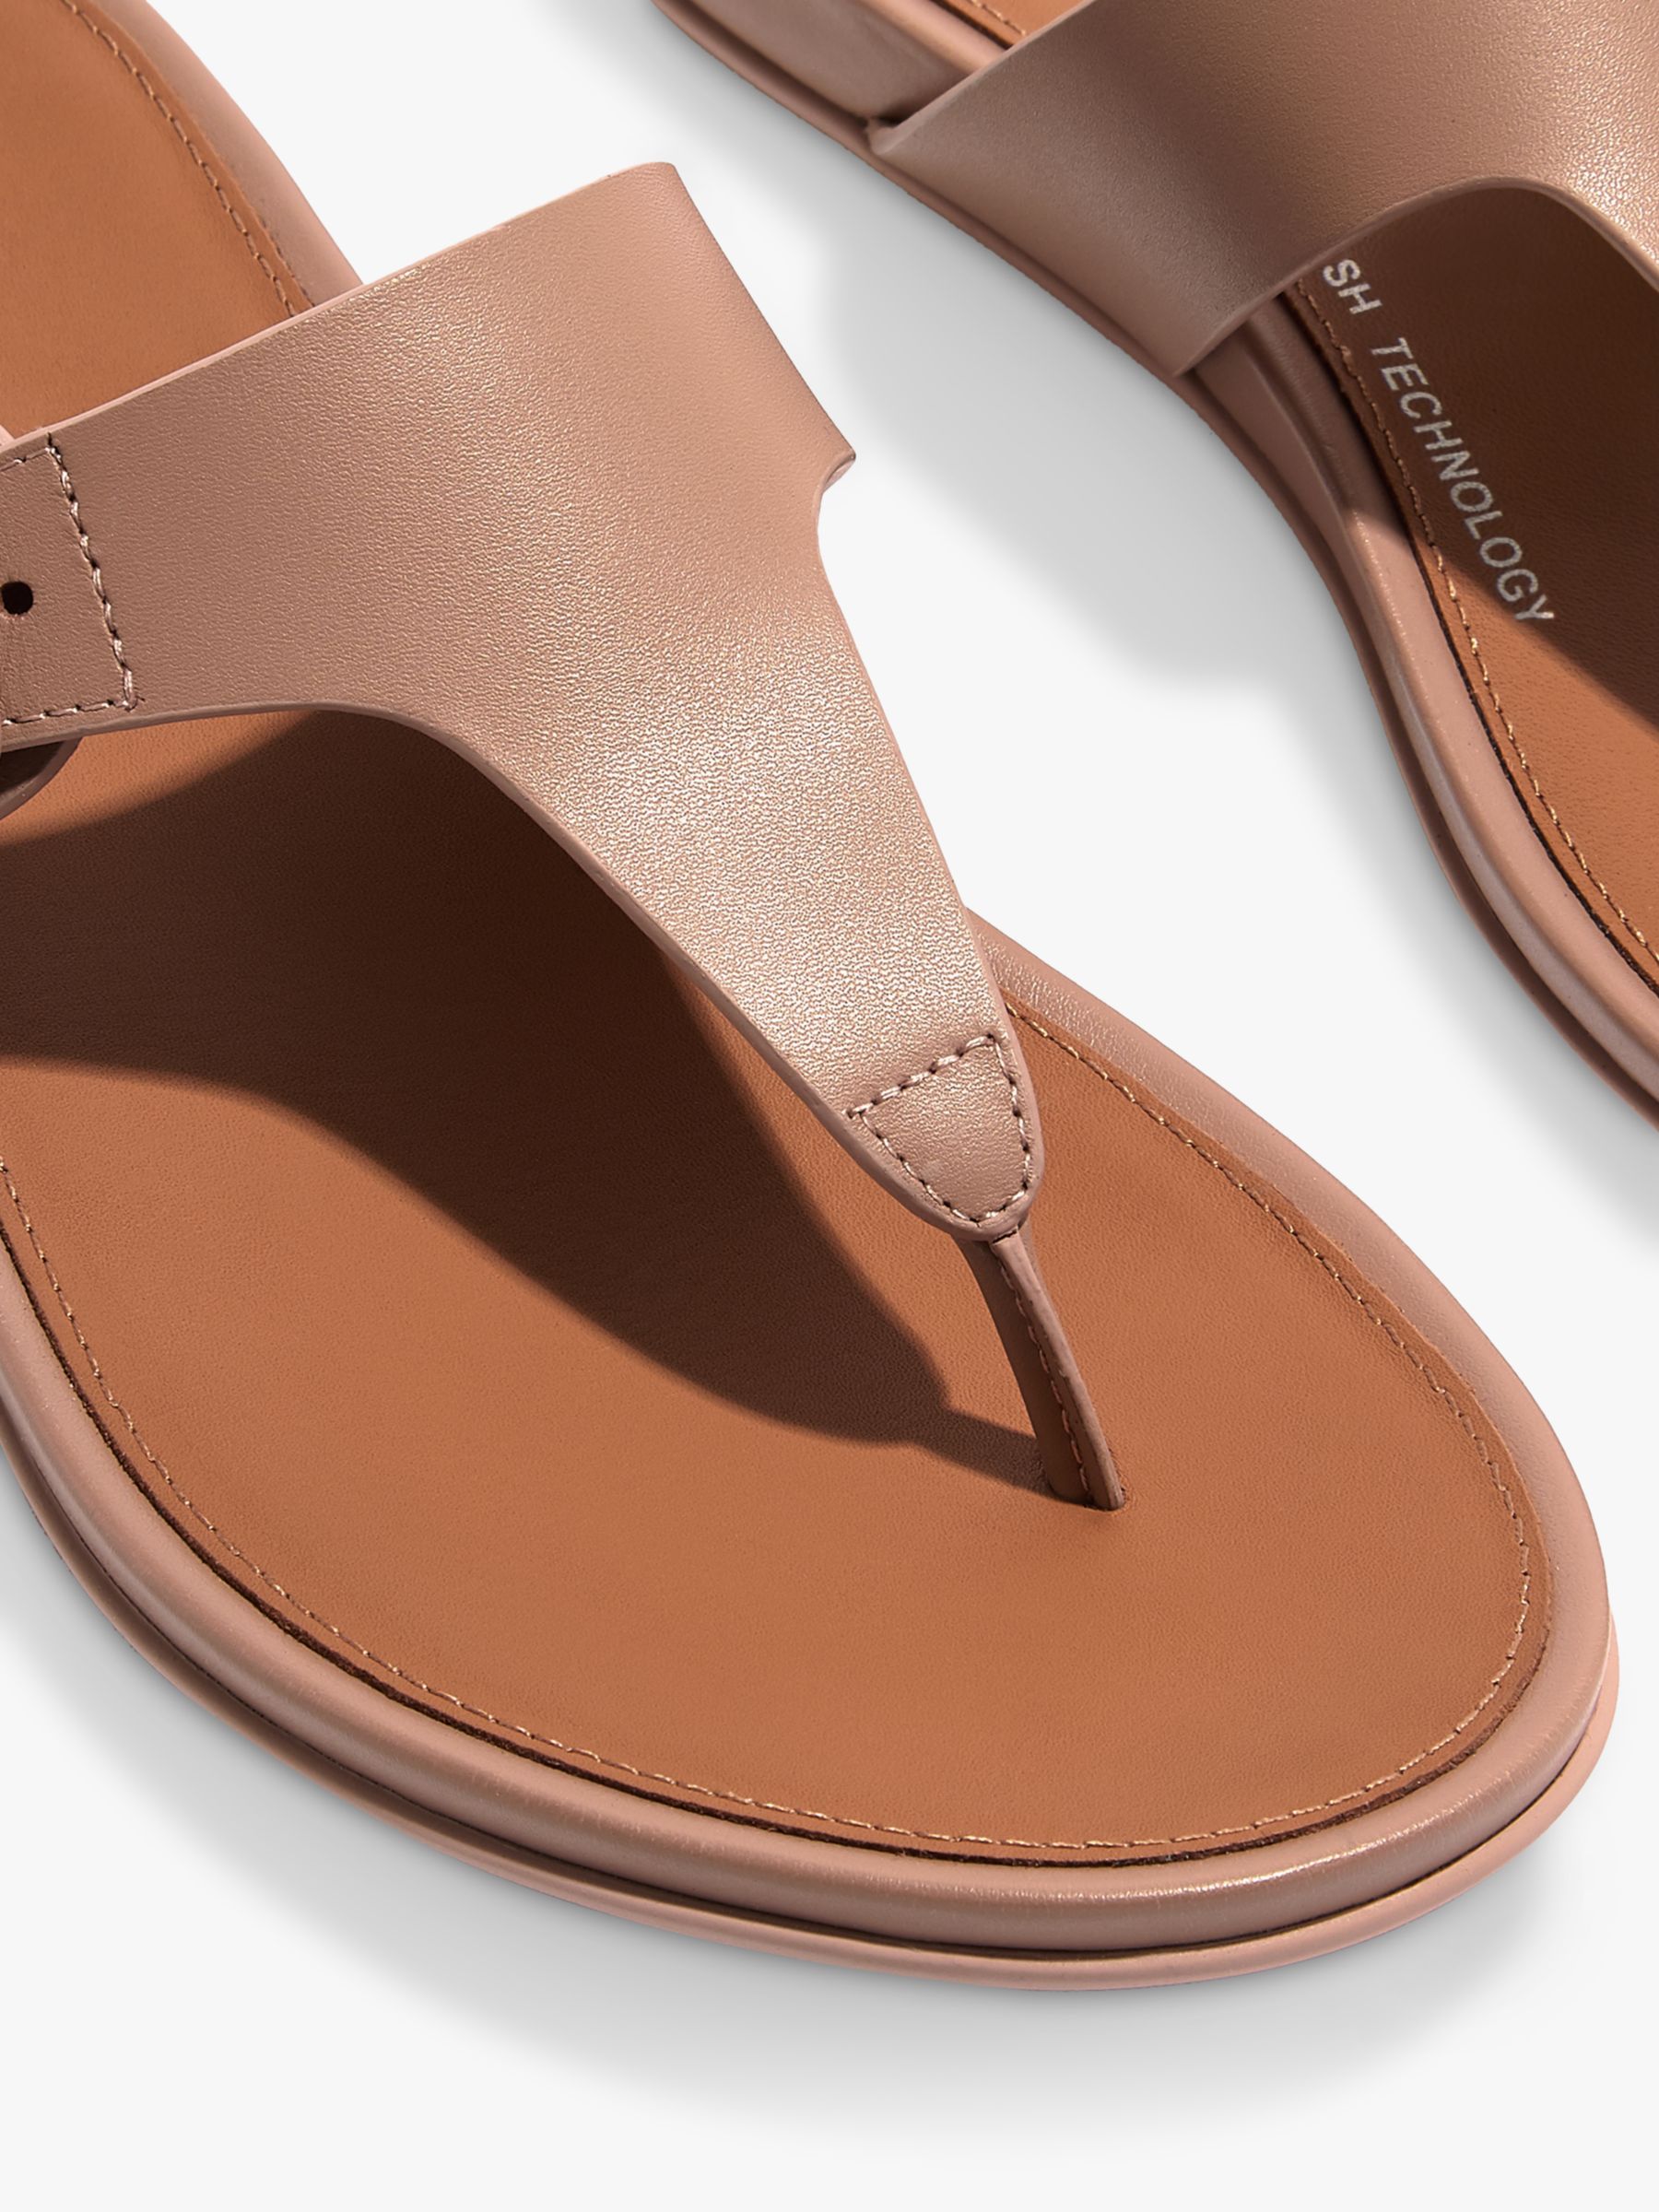 Buy FitFlop Gracie Leather Toe Post Sandals Online at johnlewis.com